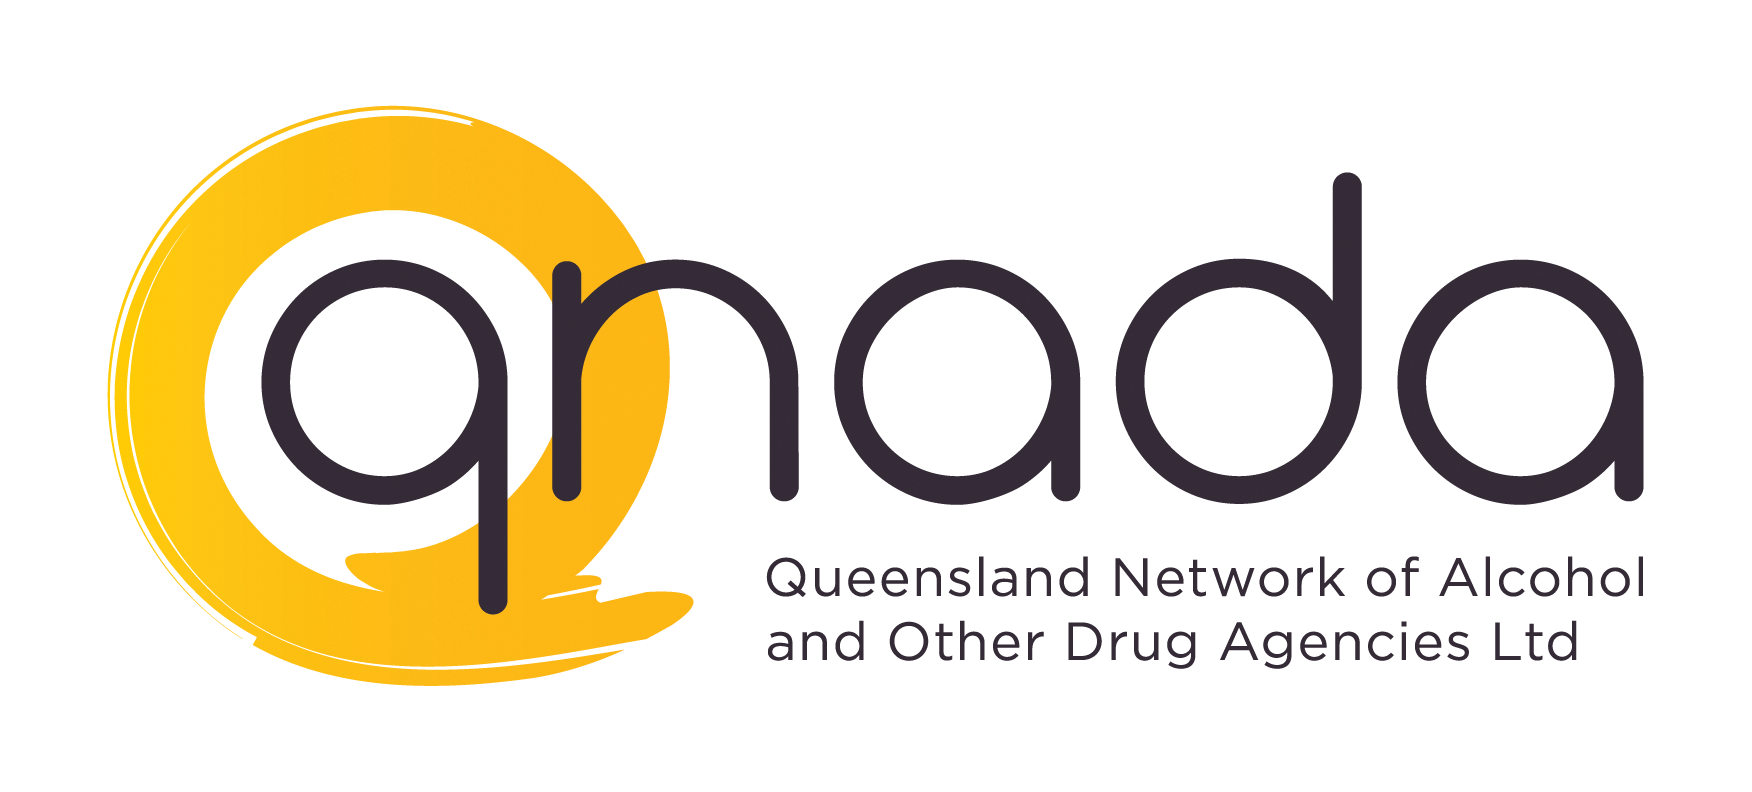 Queensland Network of Alcohol and Other Drug Agencies